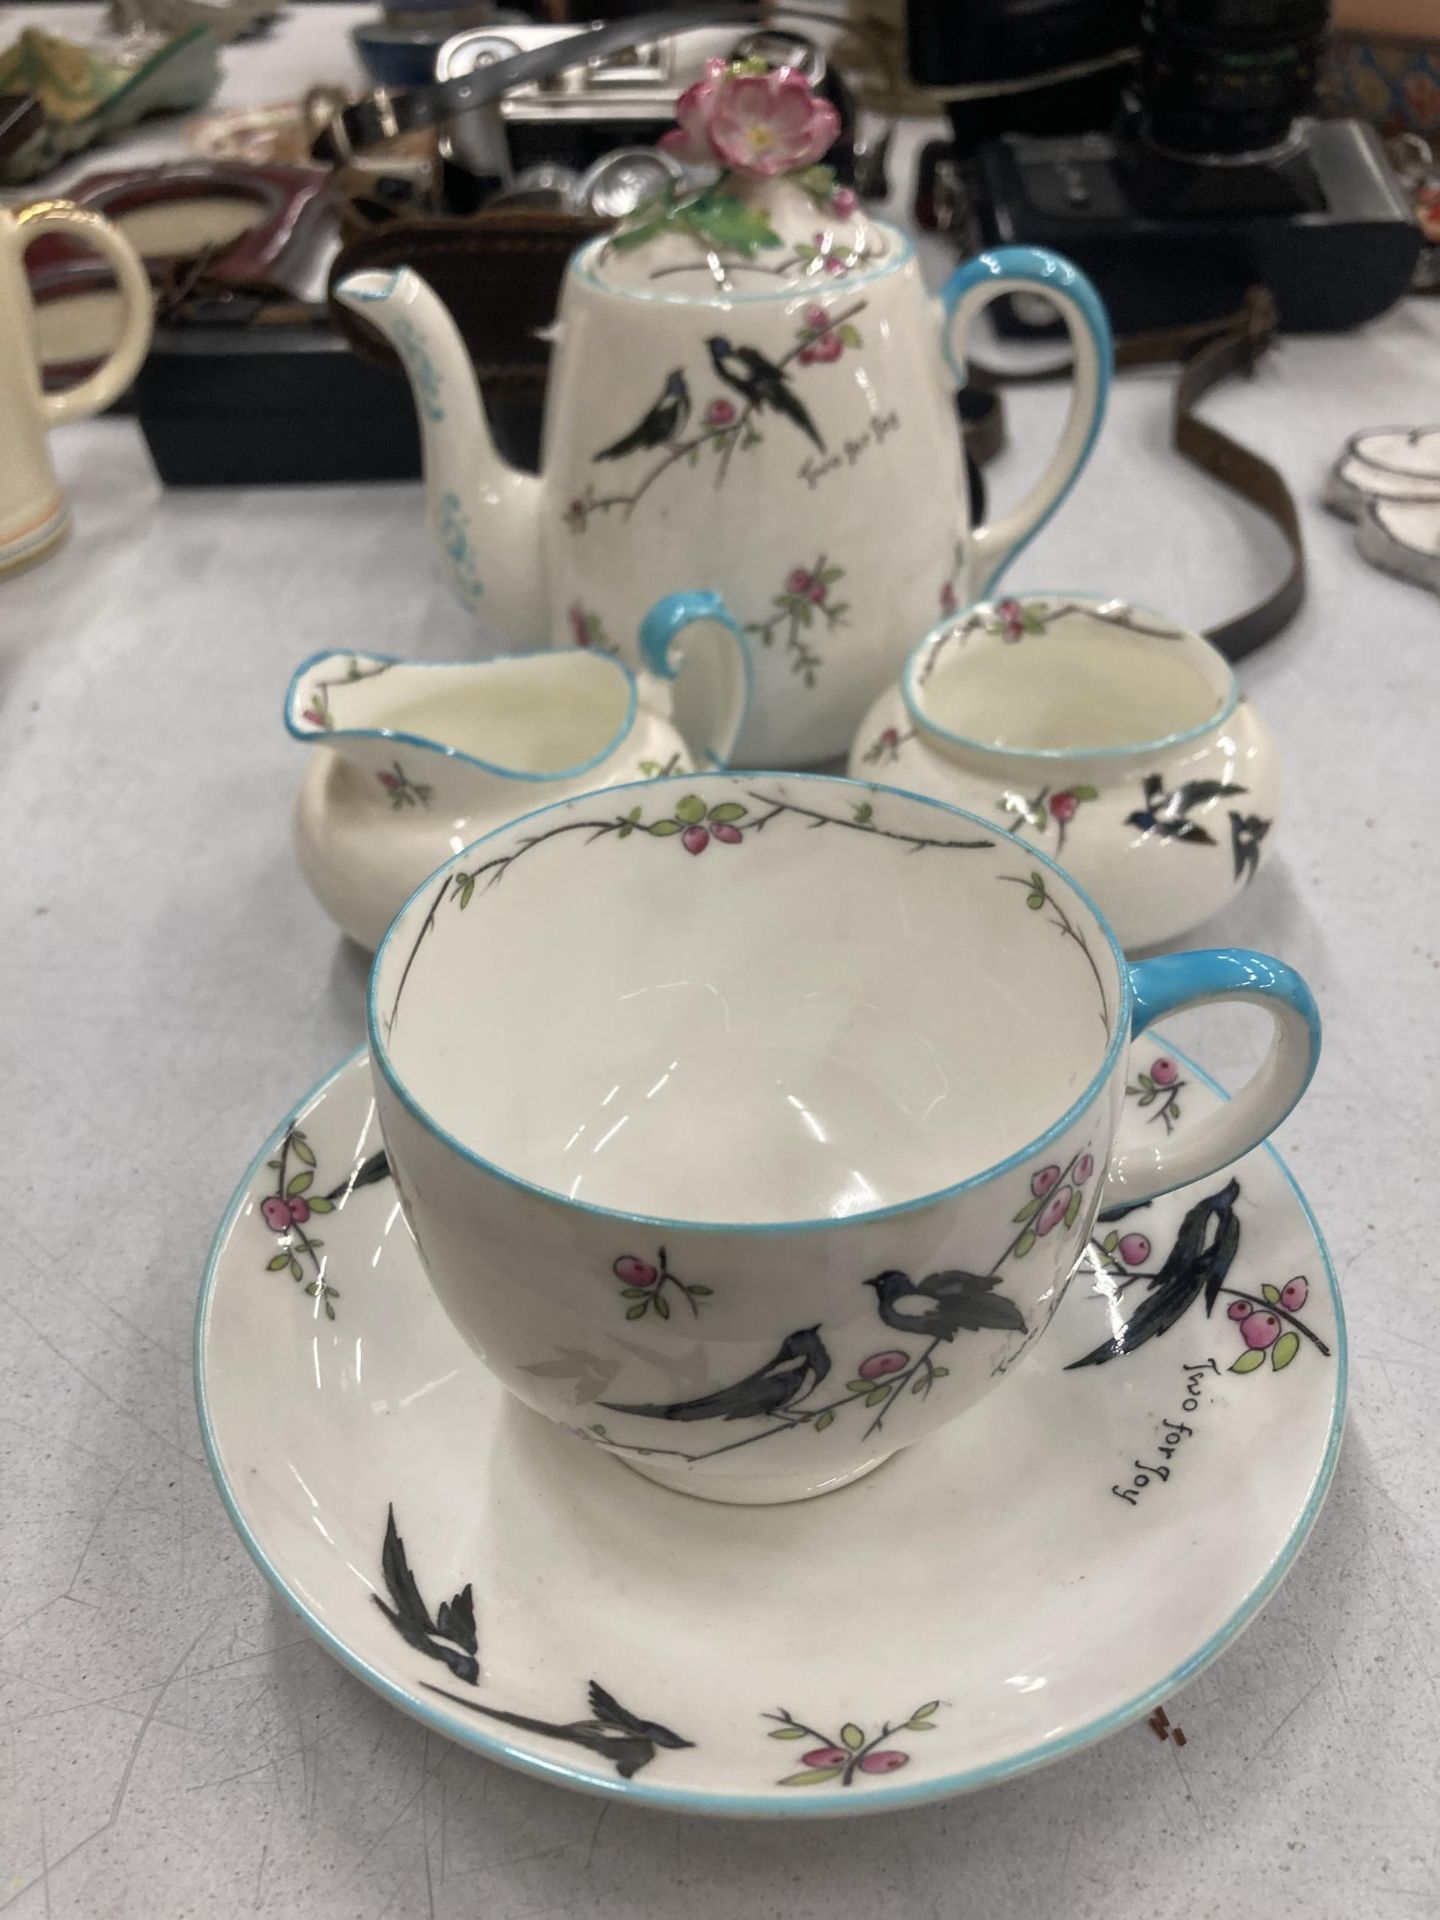 A PARAGON TEASET FOR ONE TO INCLUDE A TEAPOT, CREAM JUG, SUGAR BOWL CUP, SAUCER AND SIDE PLATE